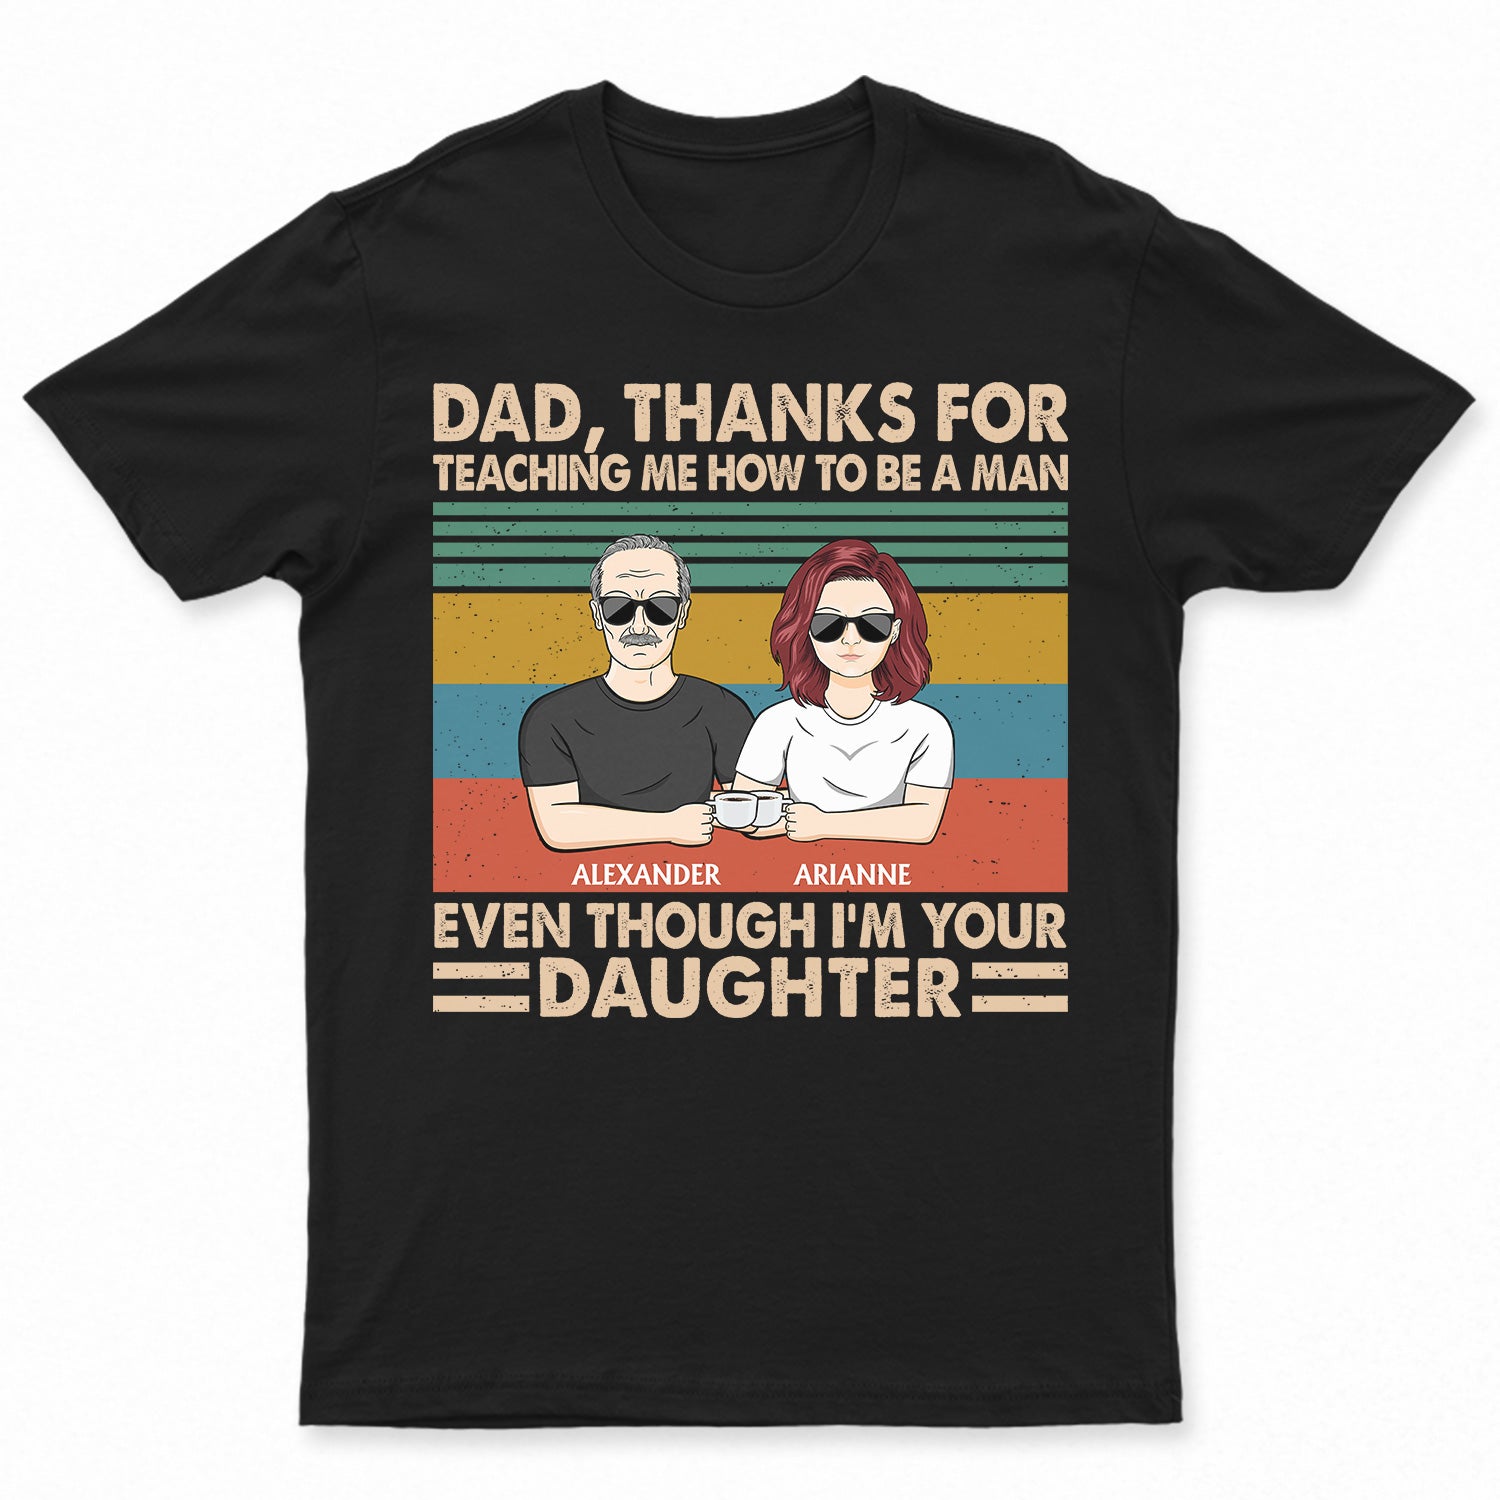 Dad Thanks For Teaching Me How To Be A Man - Birthday, Loving Gift For Dad, Father, Grandpa, Grandfather - Personalized Custom T Shirt